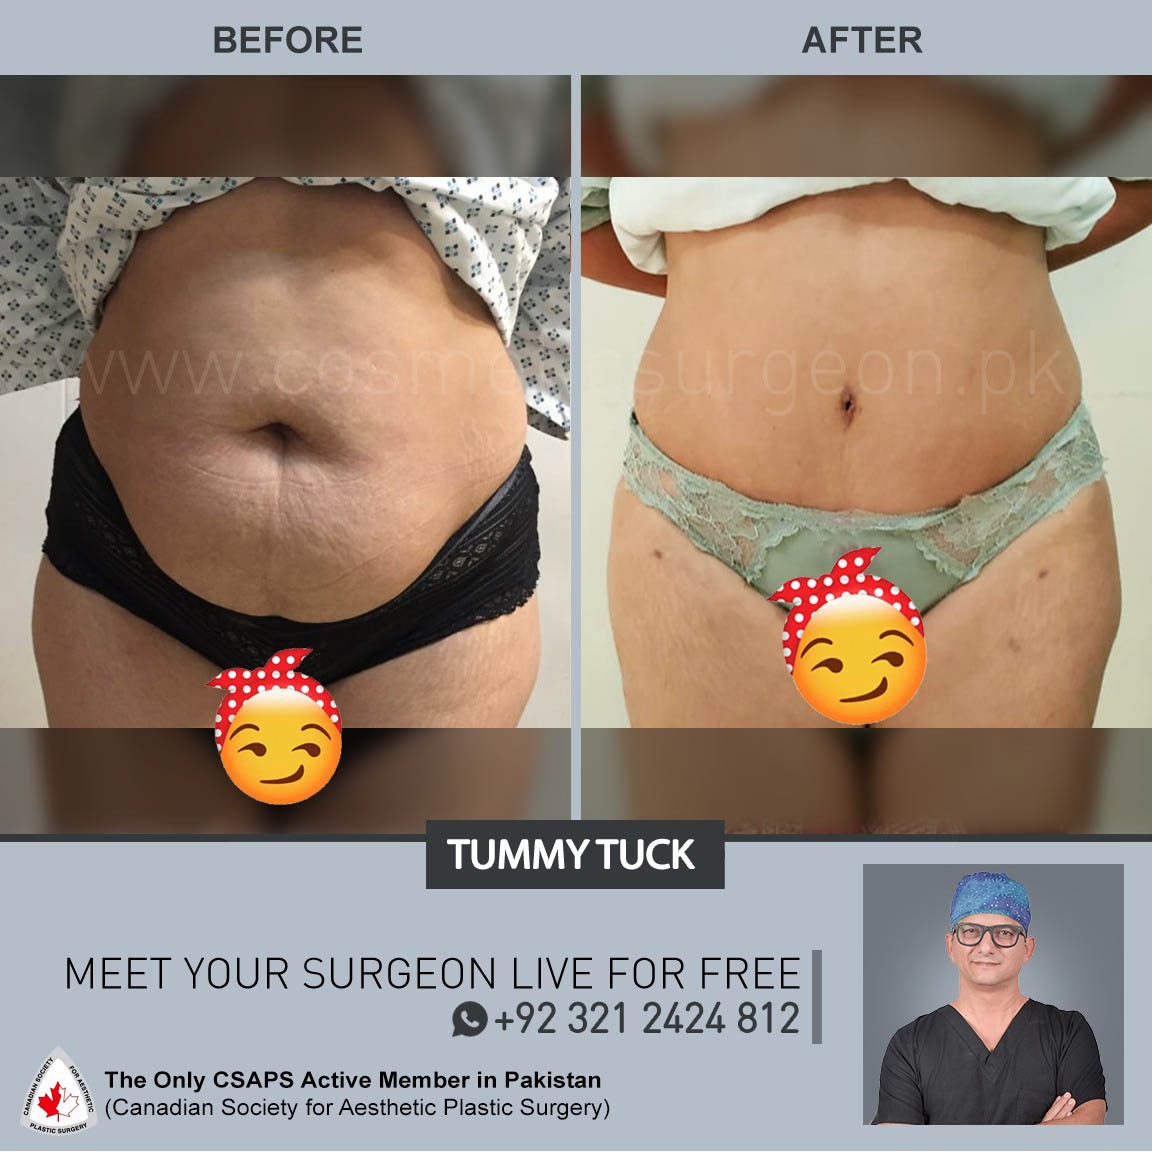 Can a Tummy Tuck Give You a Flat Stomach? - Dr Arif Hussain